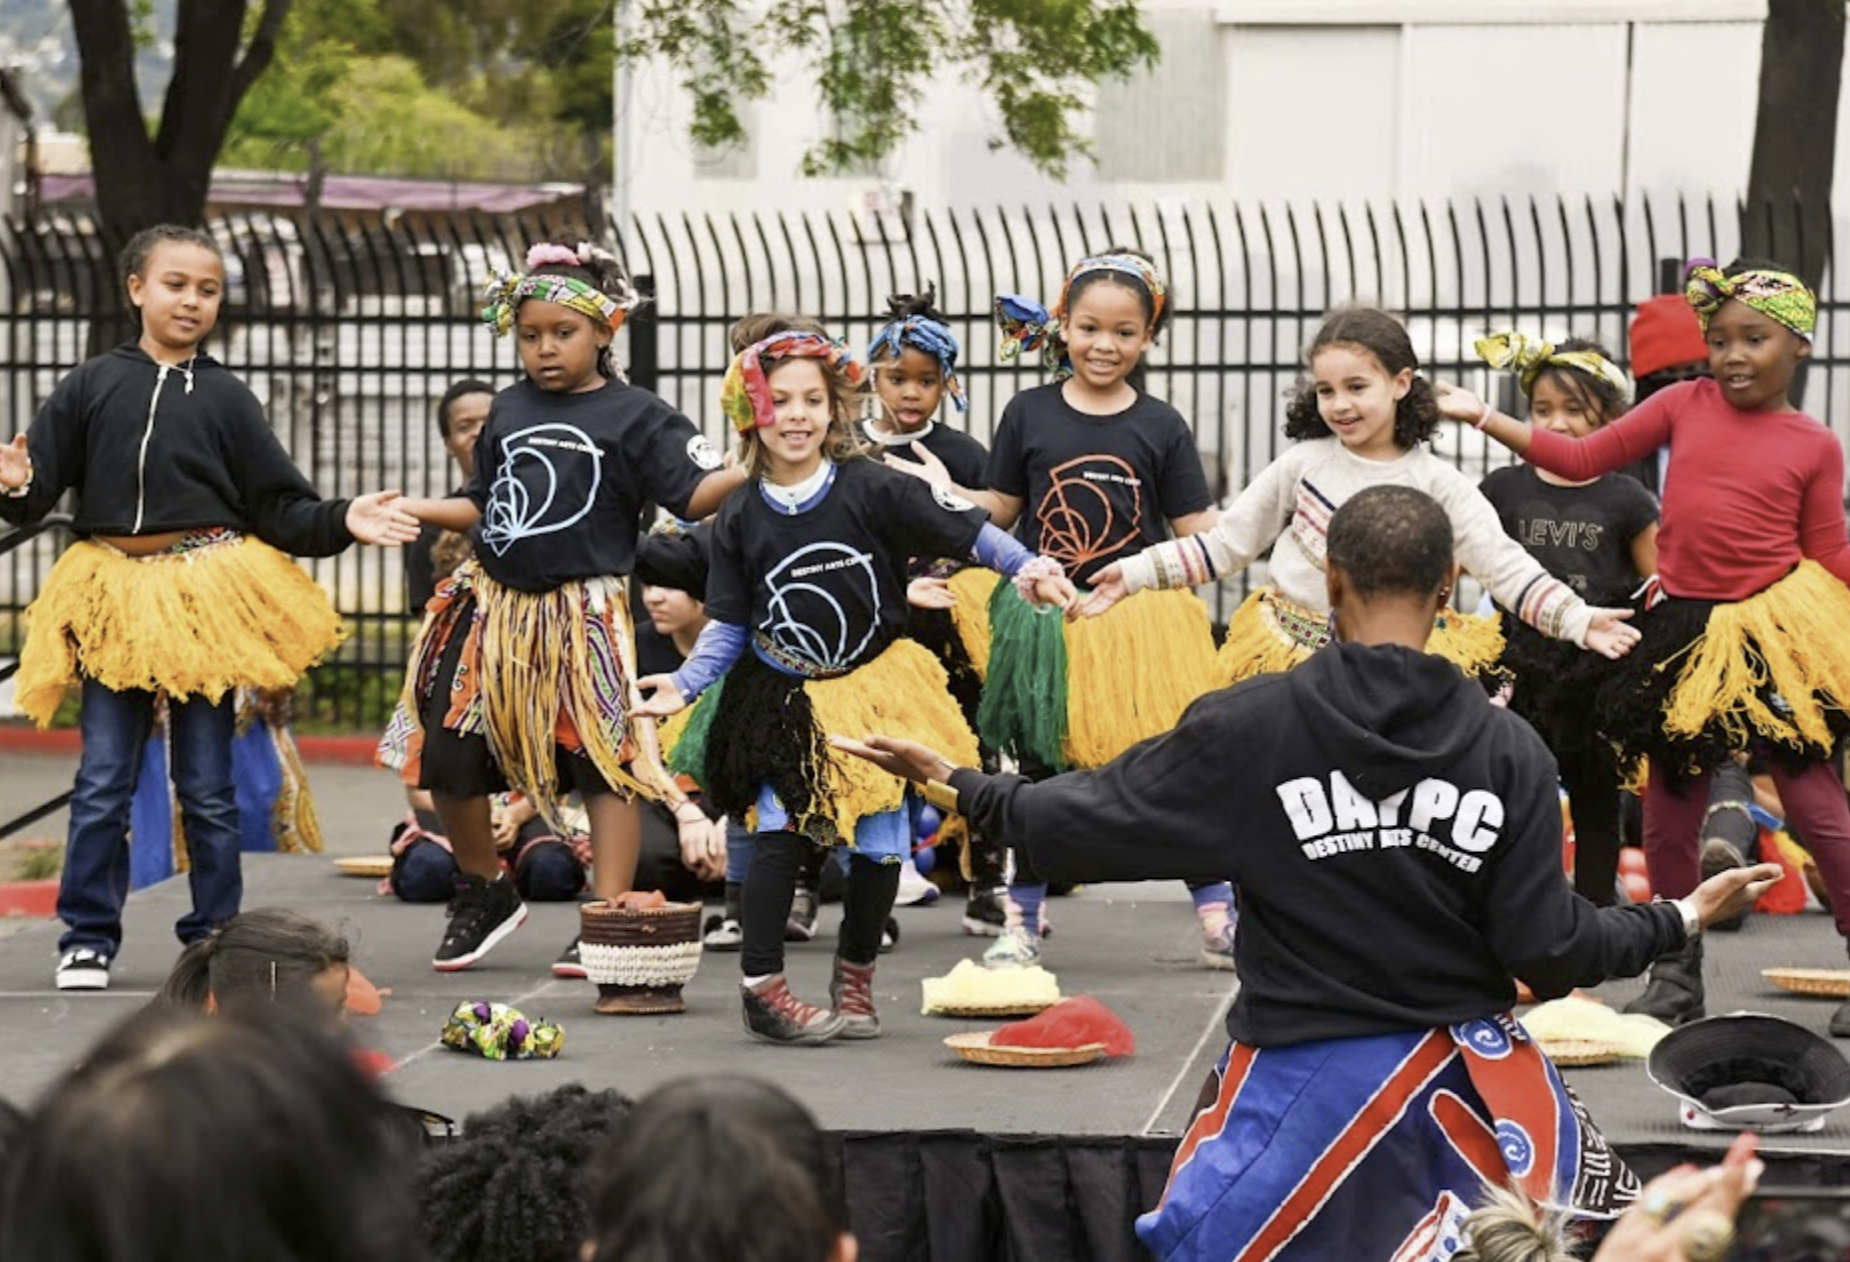 Youth on stage performing African dance with an instructor wearing DAYPC sweatshirt facing the youth.